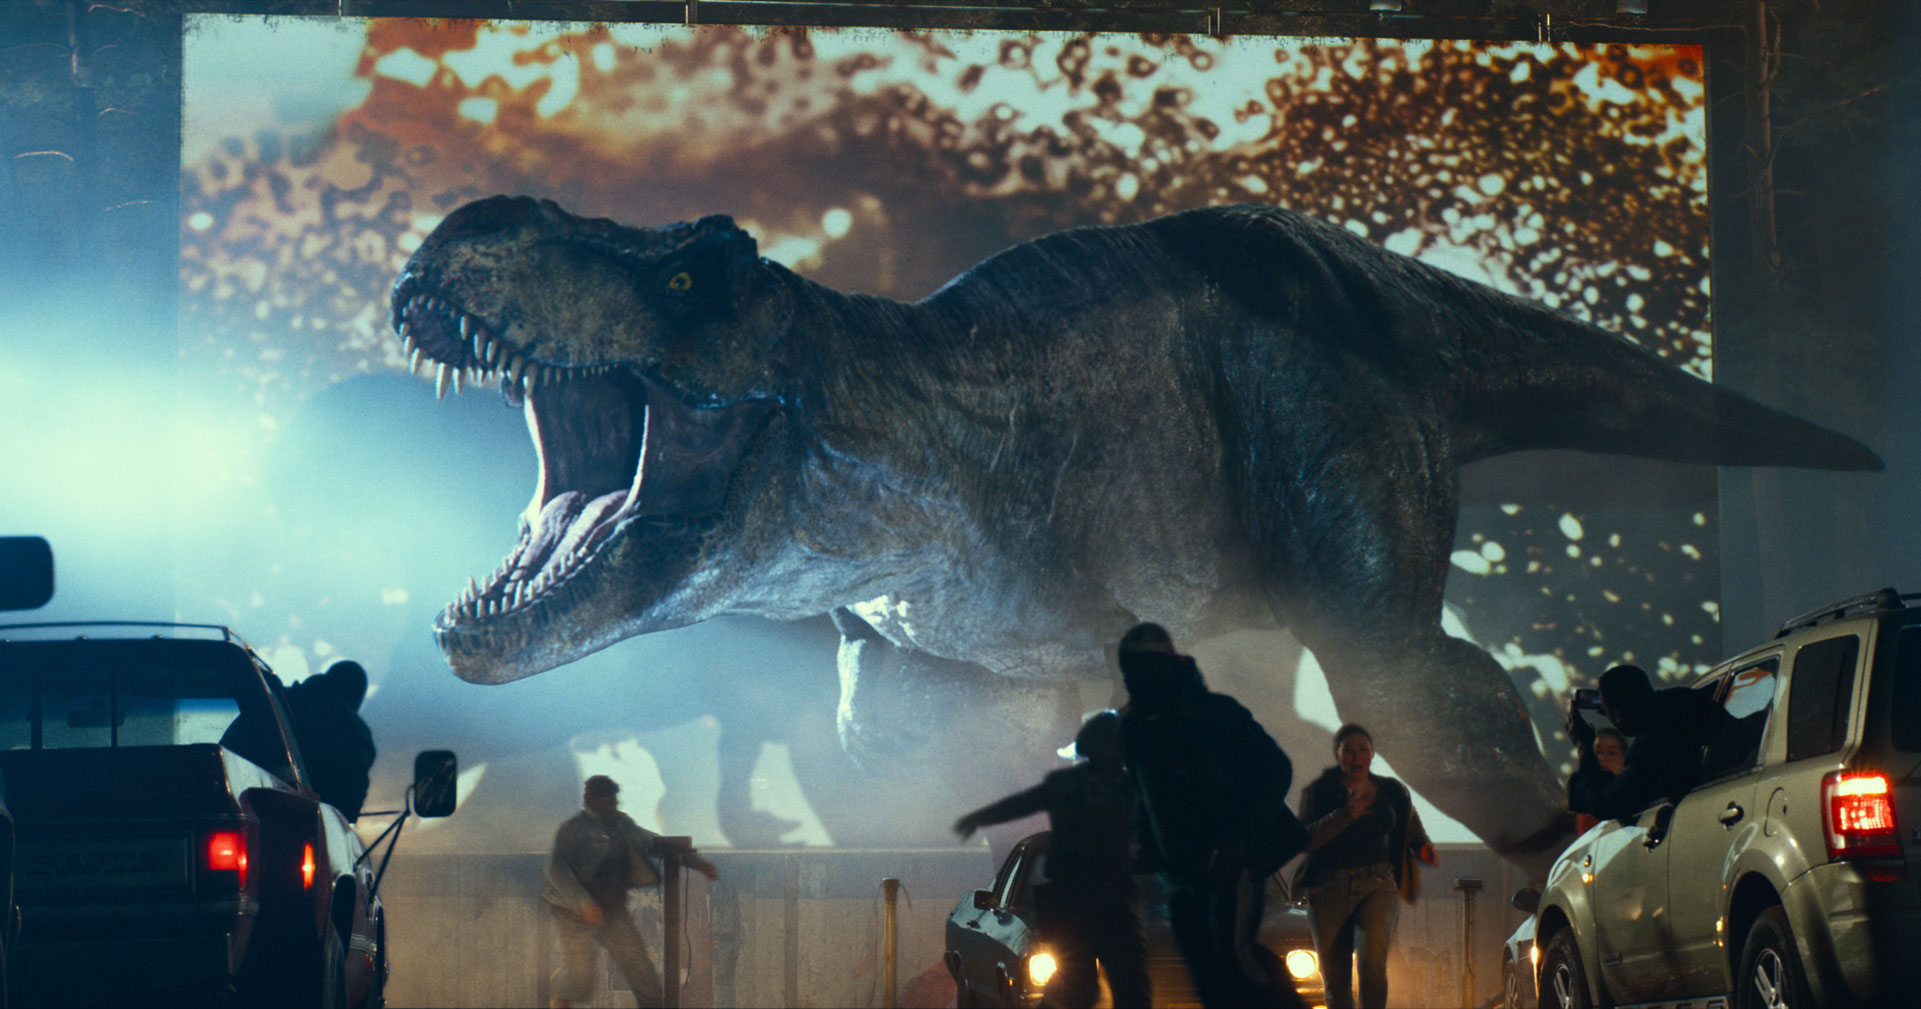 As per a report from Variety, Jurassic World 4 will shoot across the globe and we have some basic story details.